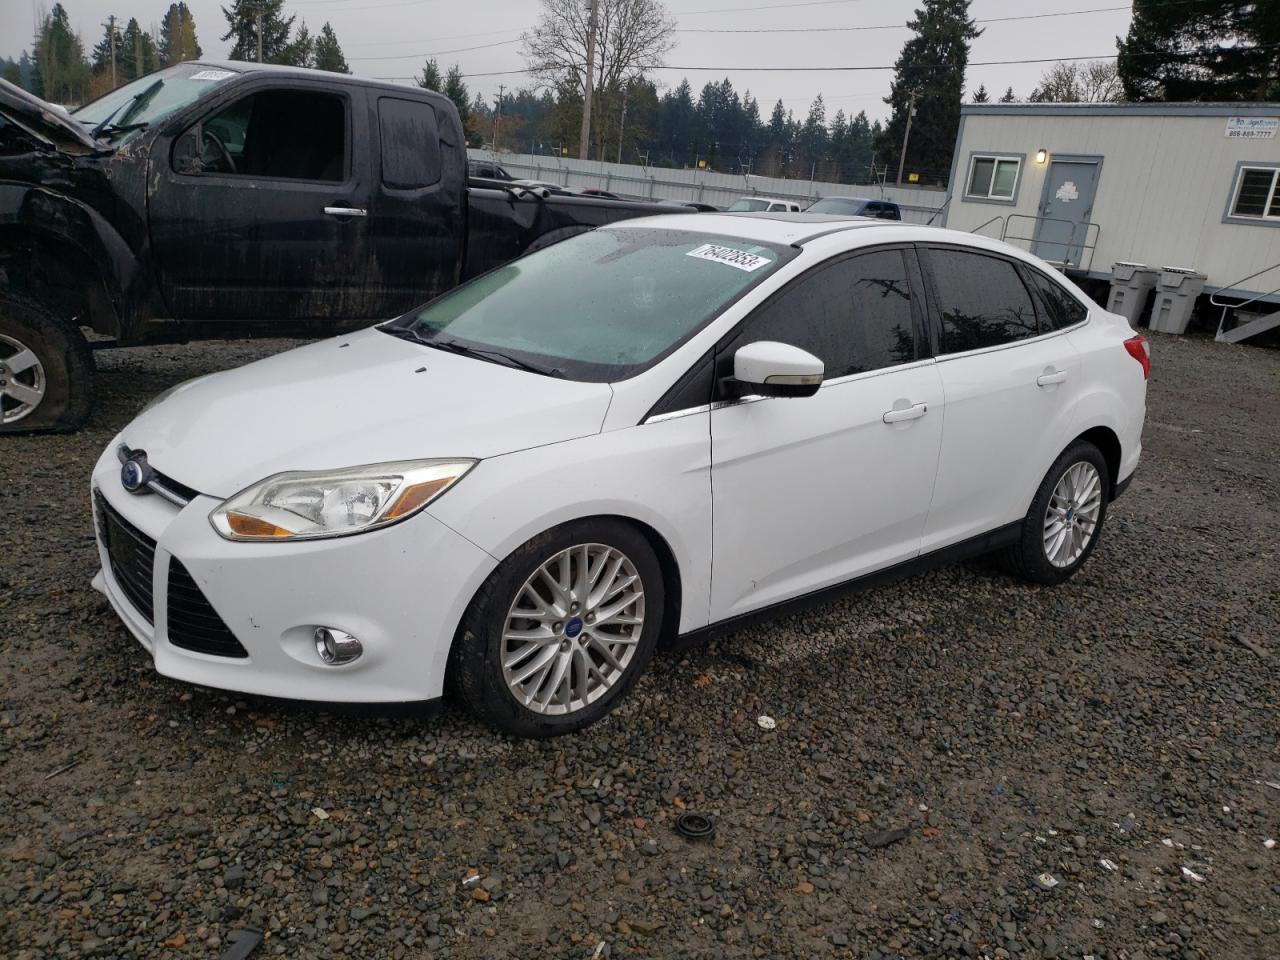 vin: 1FAHP3H24CL162194 1FAHP3H24CL162194 2012 ford focus 2000 for Sale in 98338 9206, Wa - Graham, Graham, USA